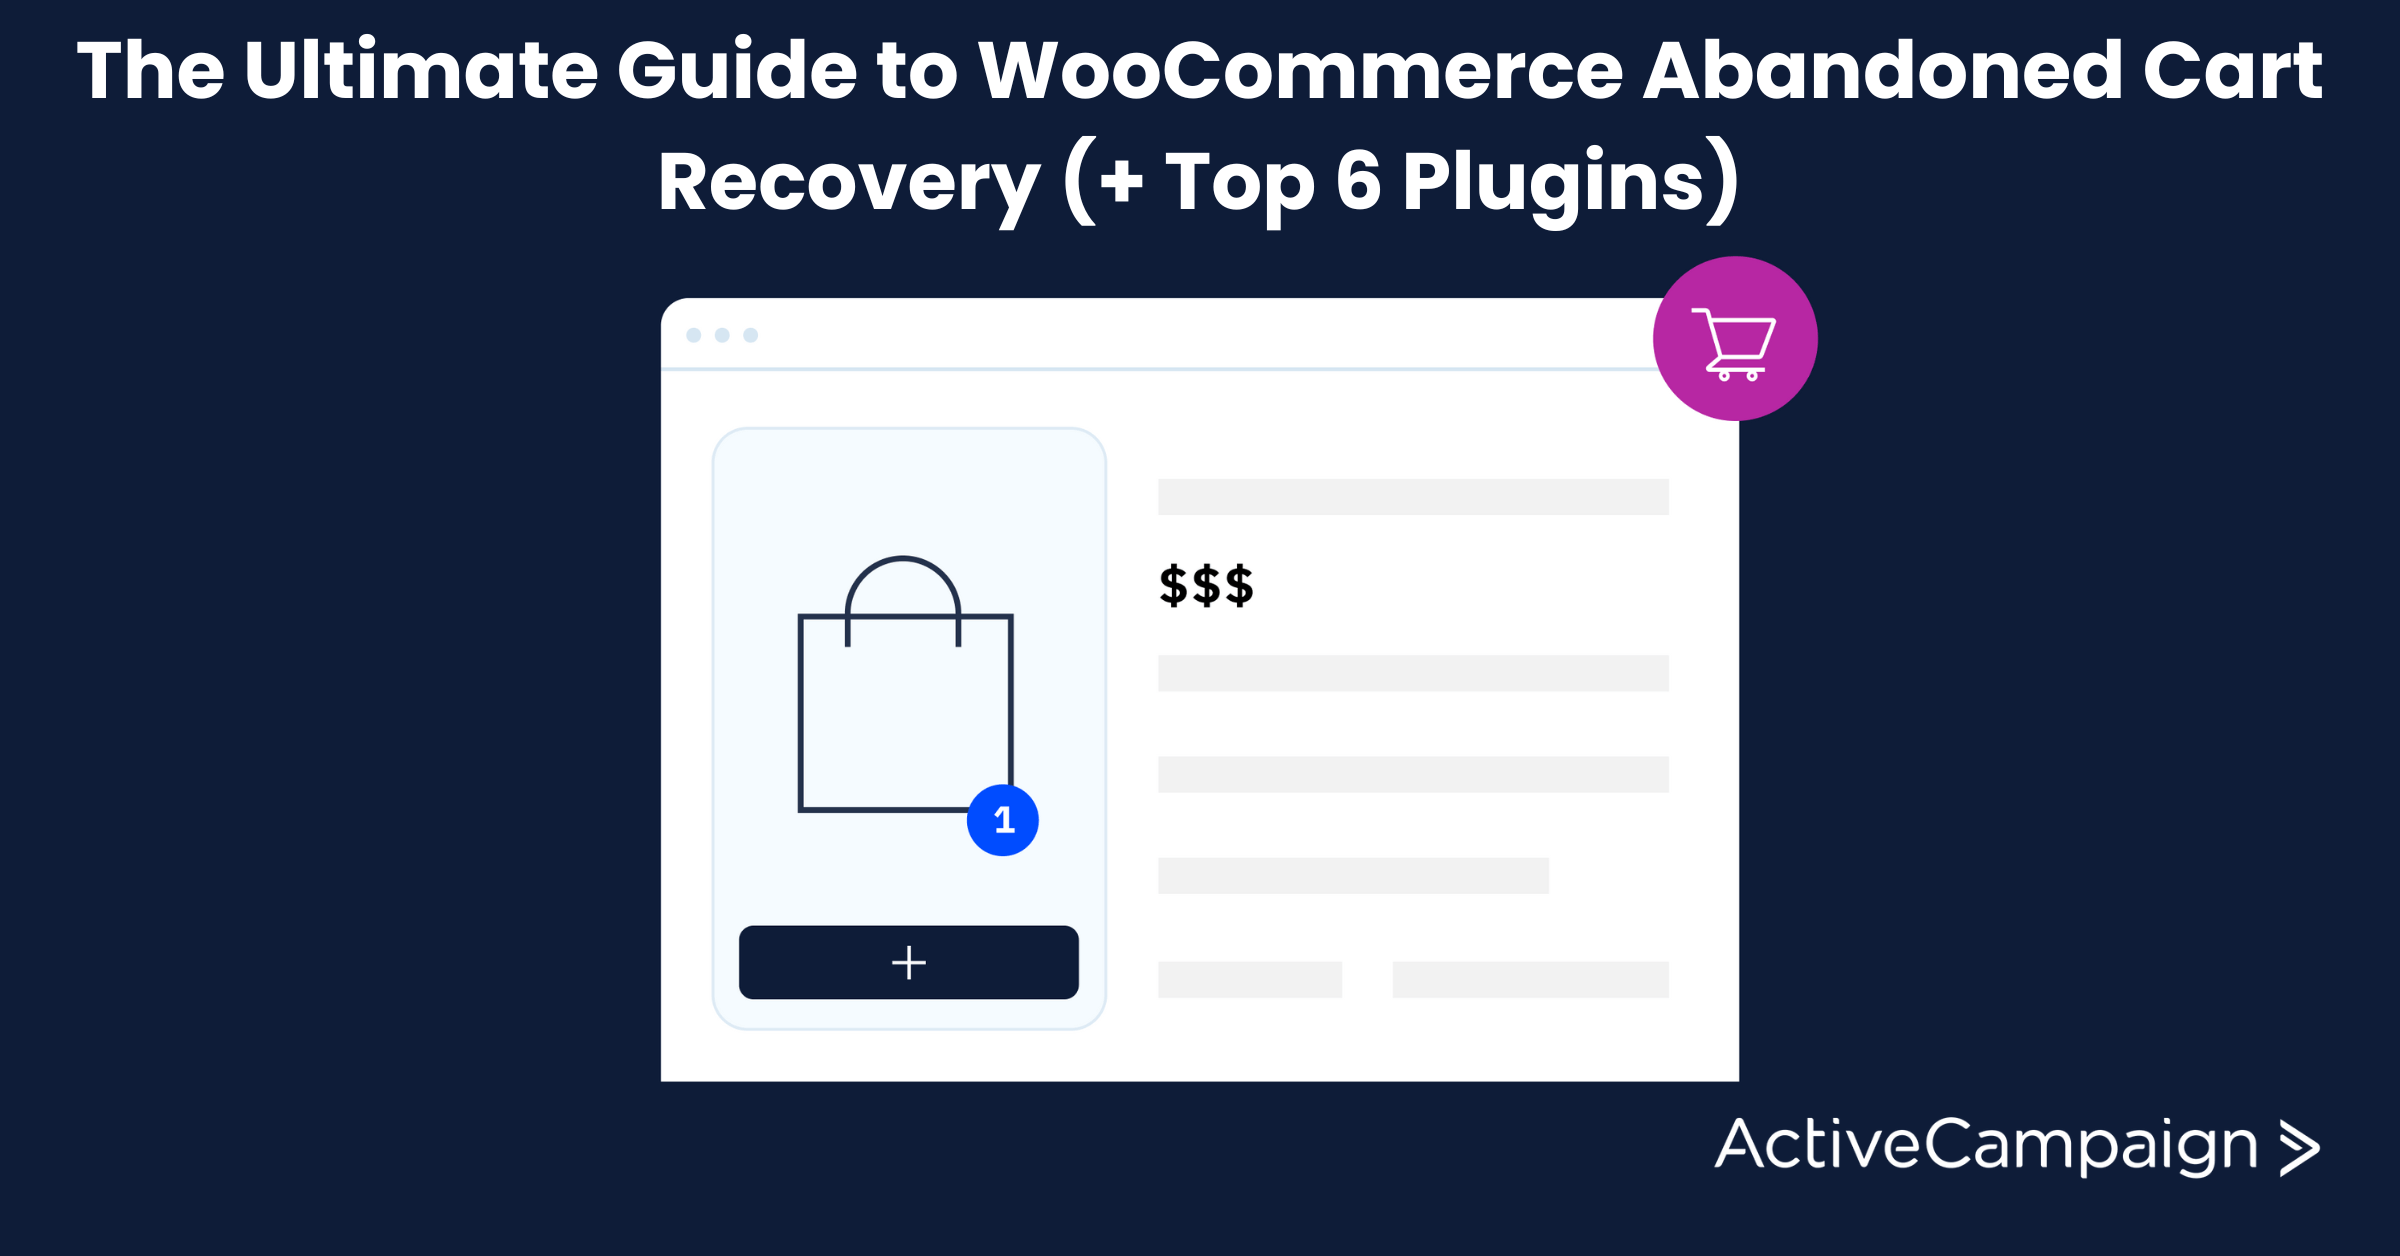 The Ultimate Guide to WooCommerce Abandoned Cart Recovery (+ Top 6 Plugins)